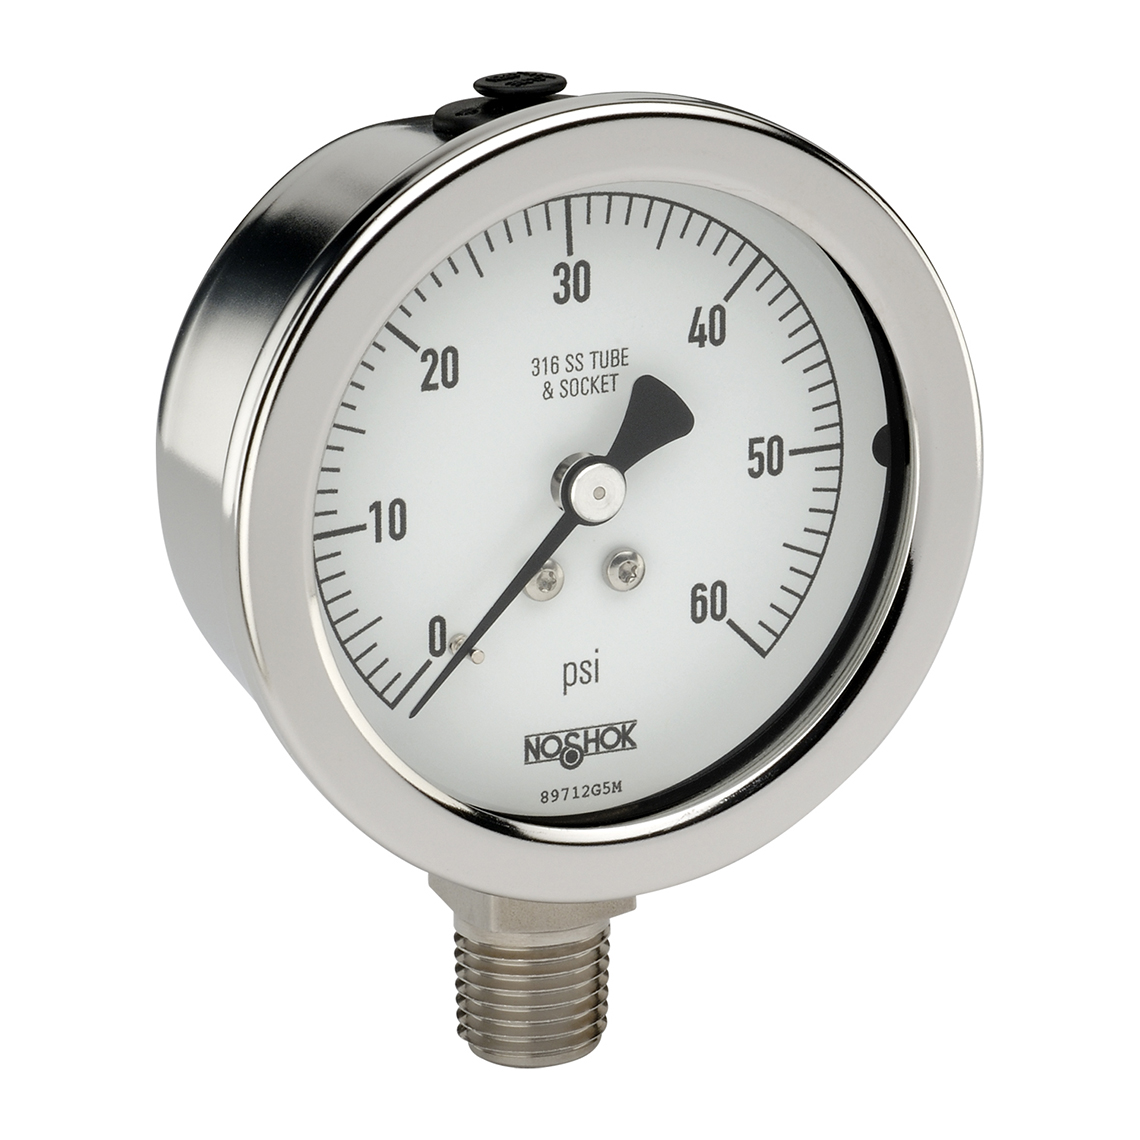 25-400-30-psi/bar 400/500 Series All Stainless Steel Dry and Liquid Filled Pressure Gauges